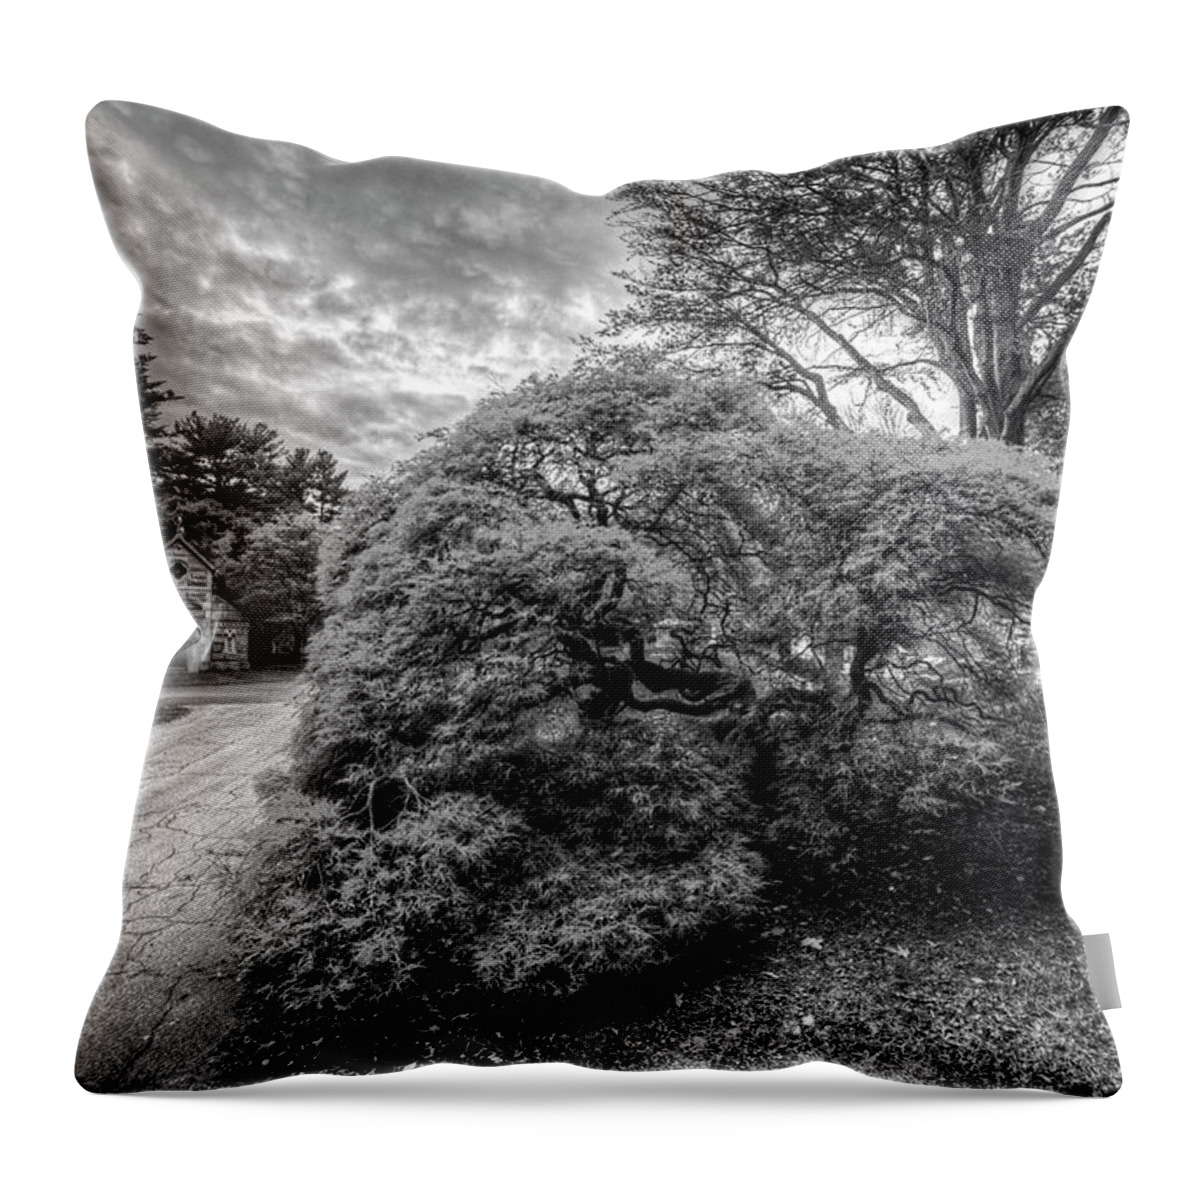 Mount Throw Pillow featuring the photograph Mount Auburn Cemetery Beautiful Japanese Maple Tree Orange Autumn Black and White by Toby McGuire